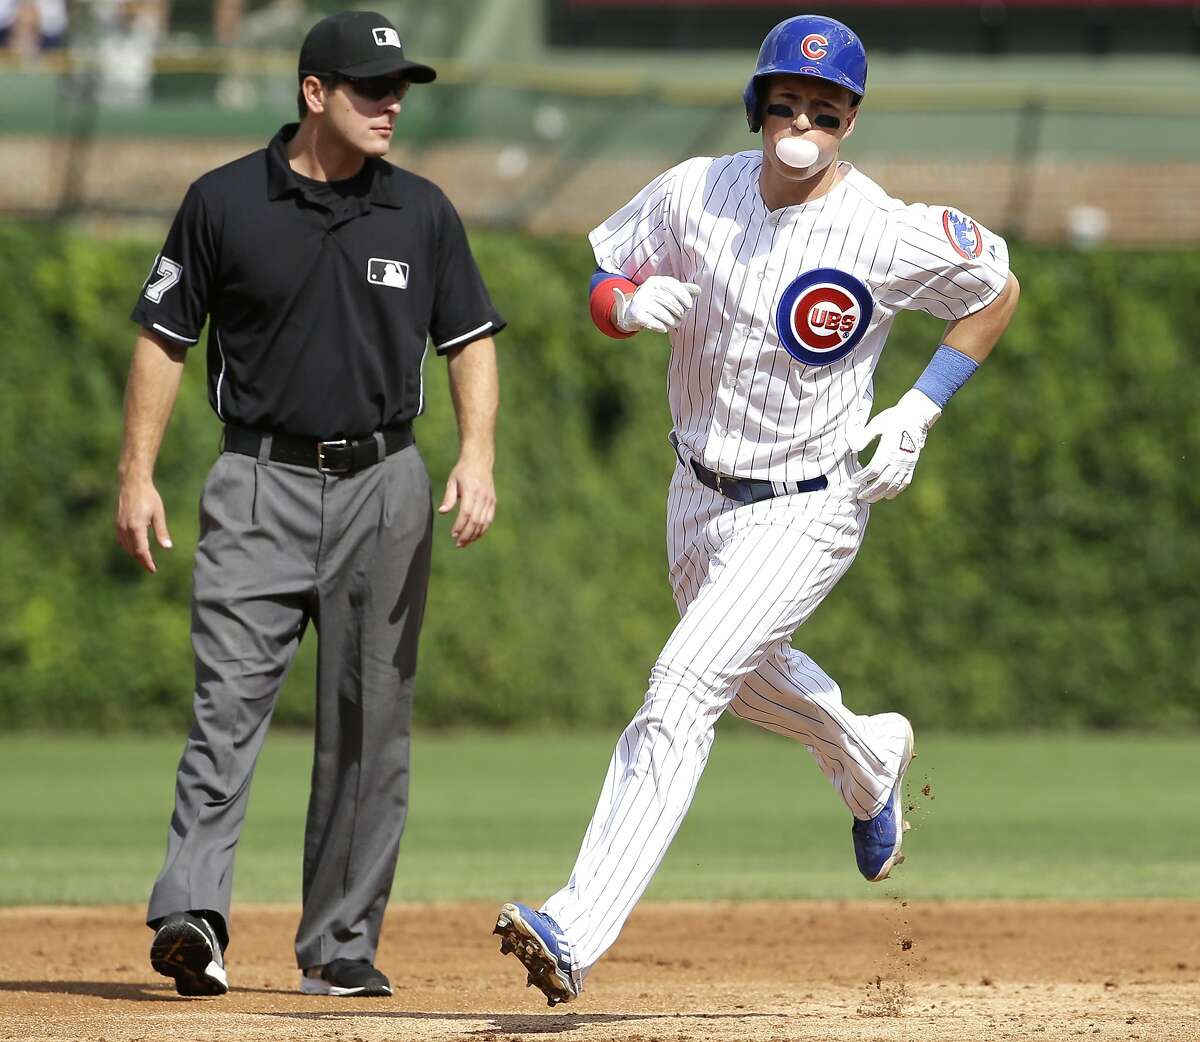 Chicago Cubs' Chris Coghlan rounds the bases after hitting a solo home run during the first inning of a baseball game against the Atlanta Braves Friday, Aug. 21, 2015, in Chicago. (AP Photo/Nam Y. Huh)